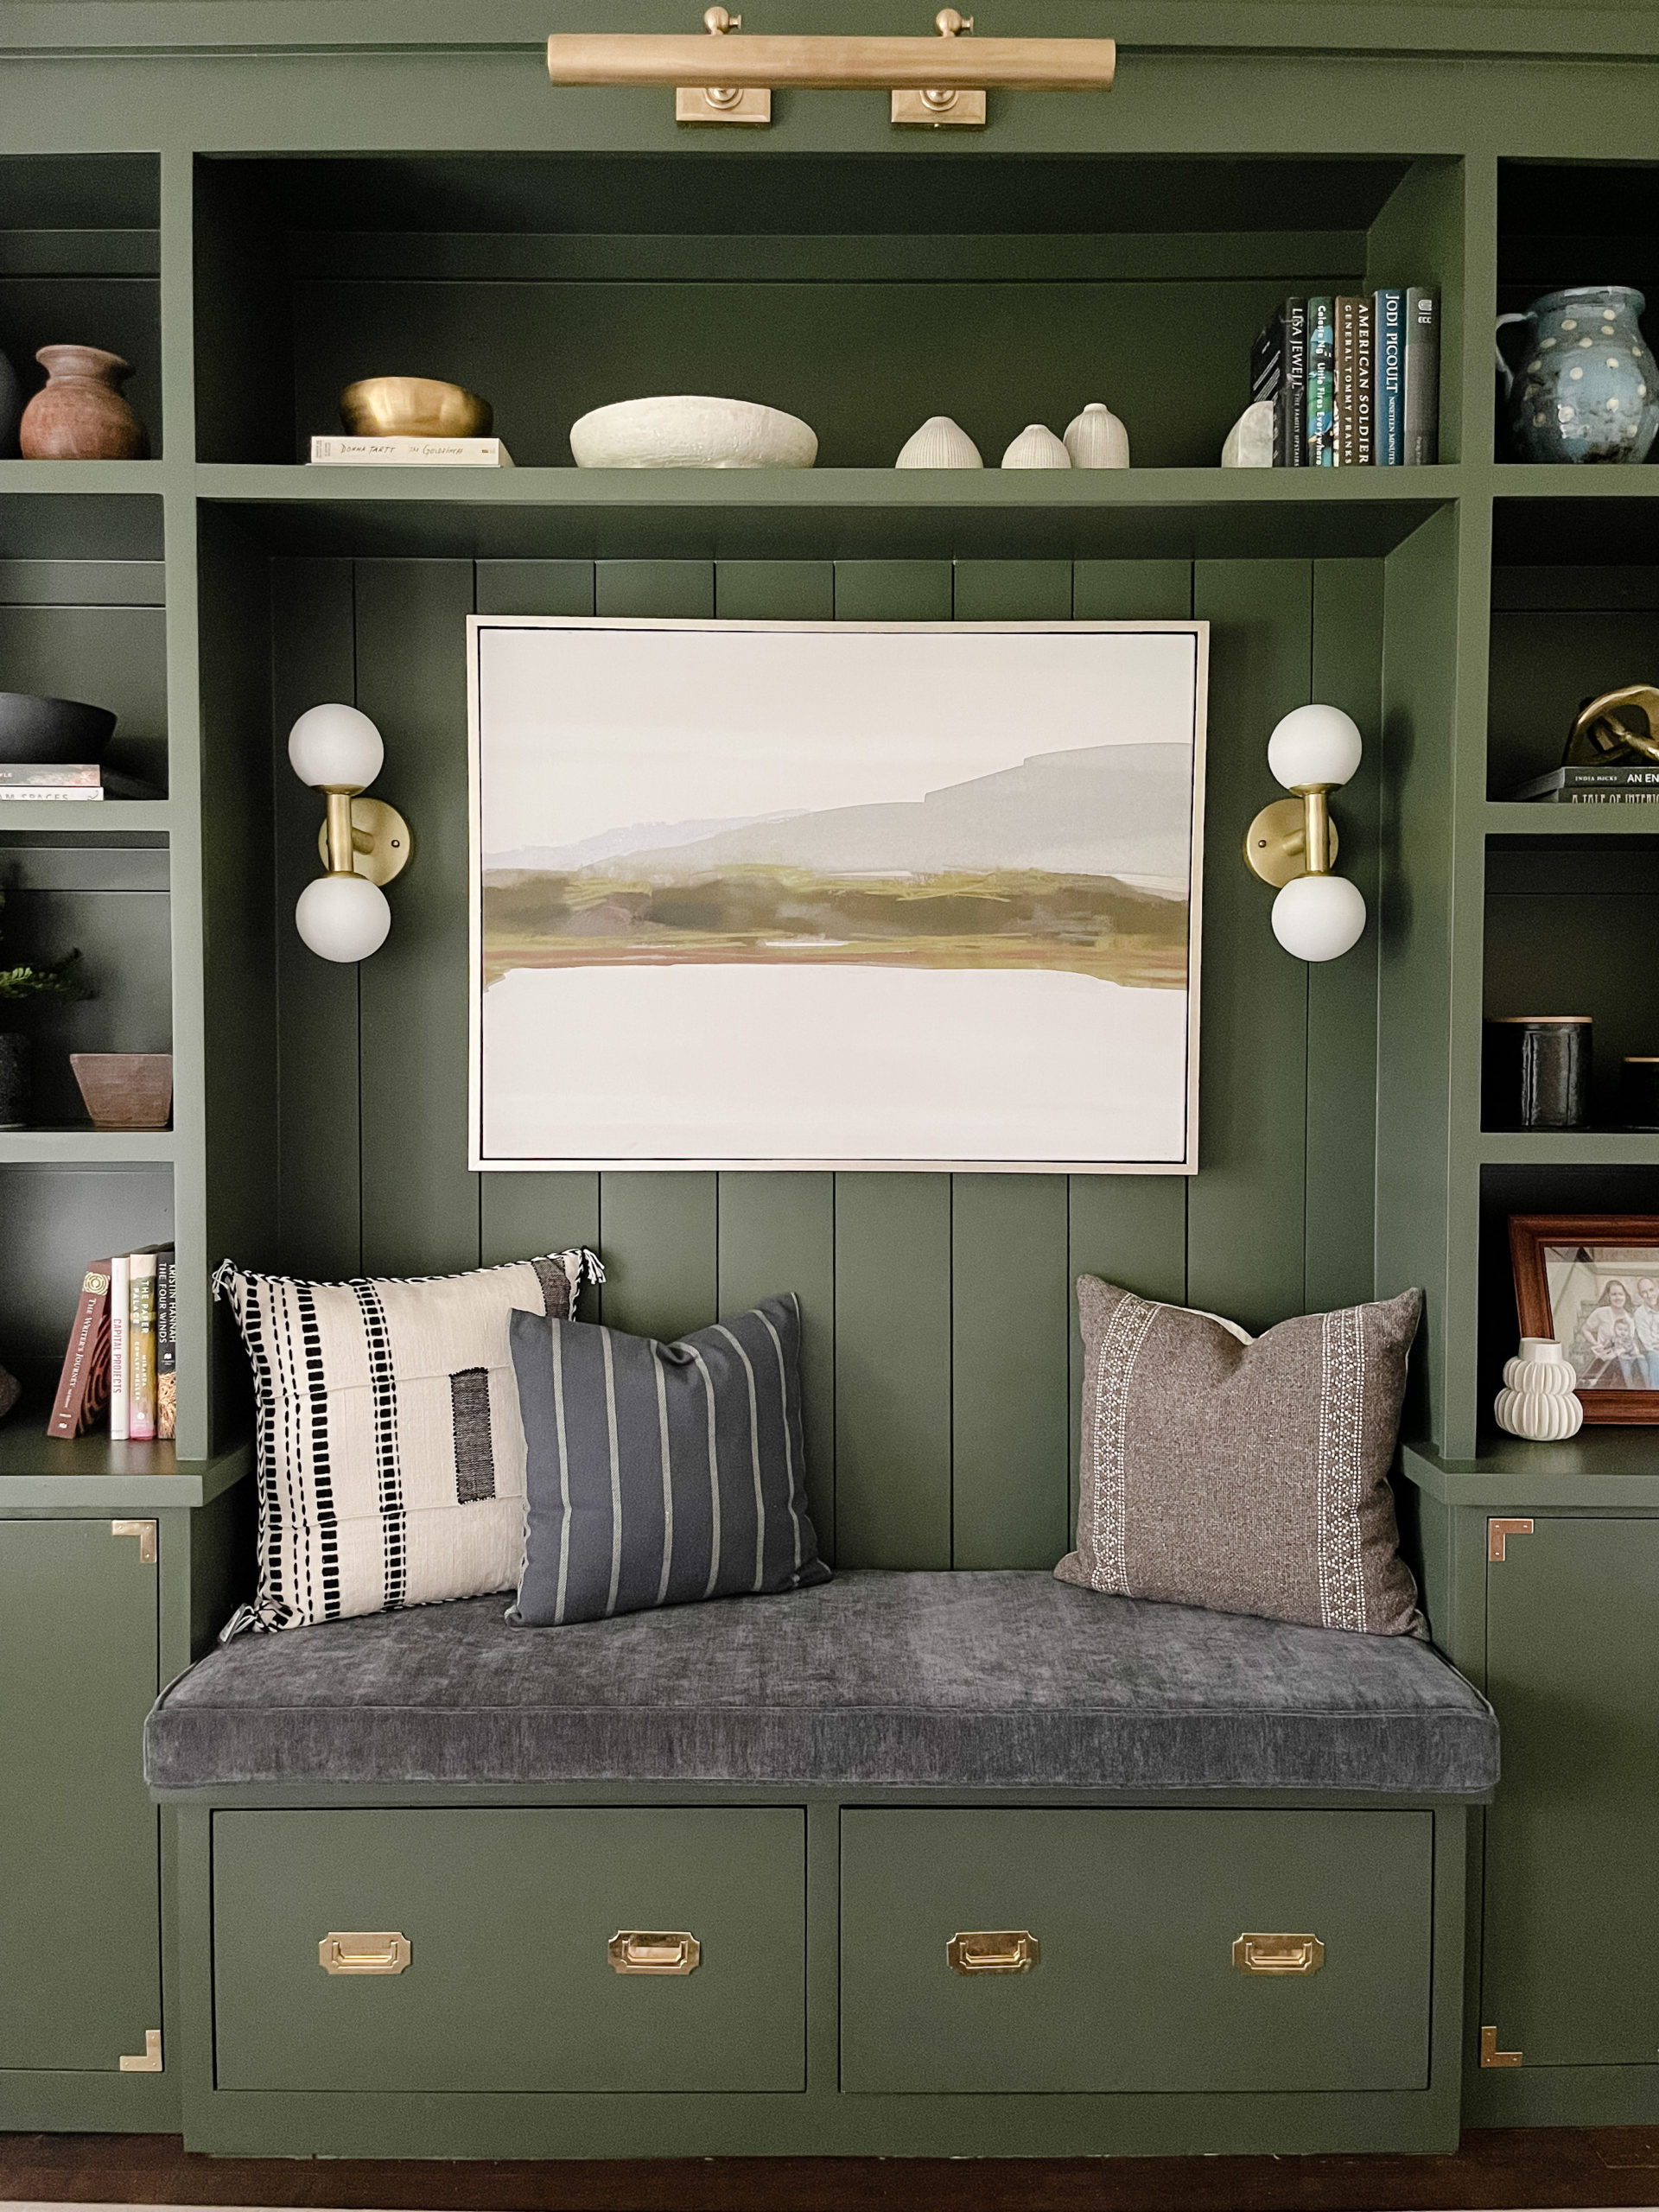 Southern Eclectic Designs | Interior Design |  Our Favorite Greens | Paint Swatches | Design | Green Interior Design | Home Design | Home Decor | 